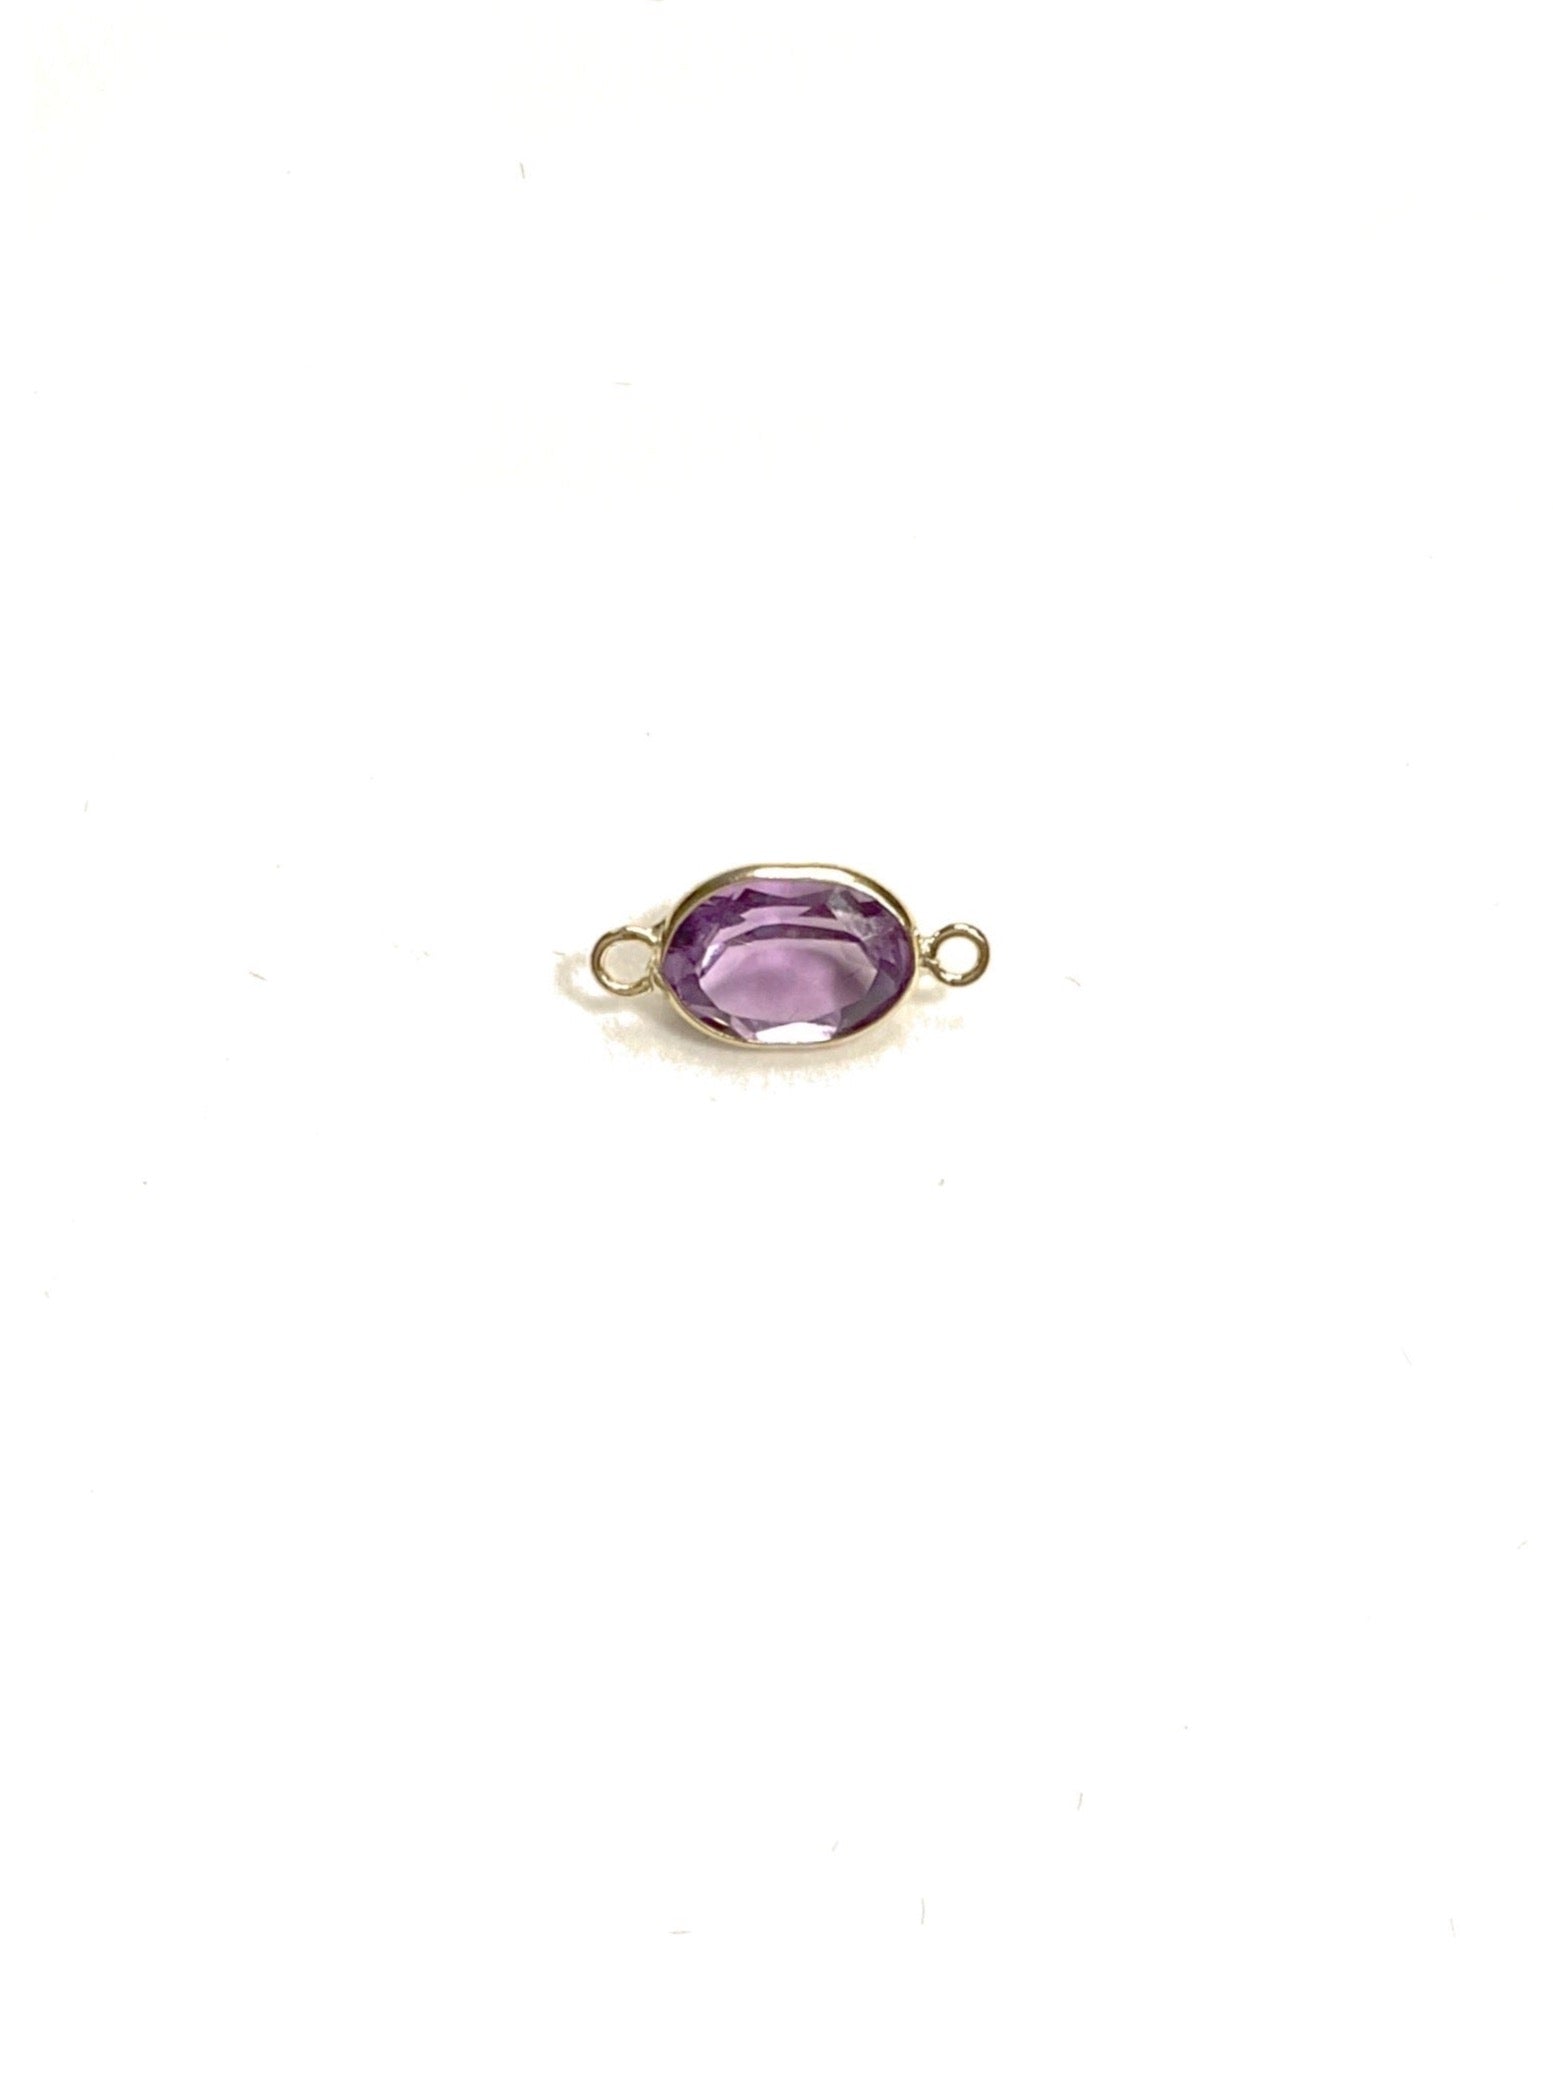 Oval Gemstone Charm in 14kt Gold